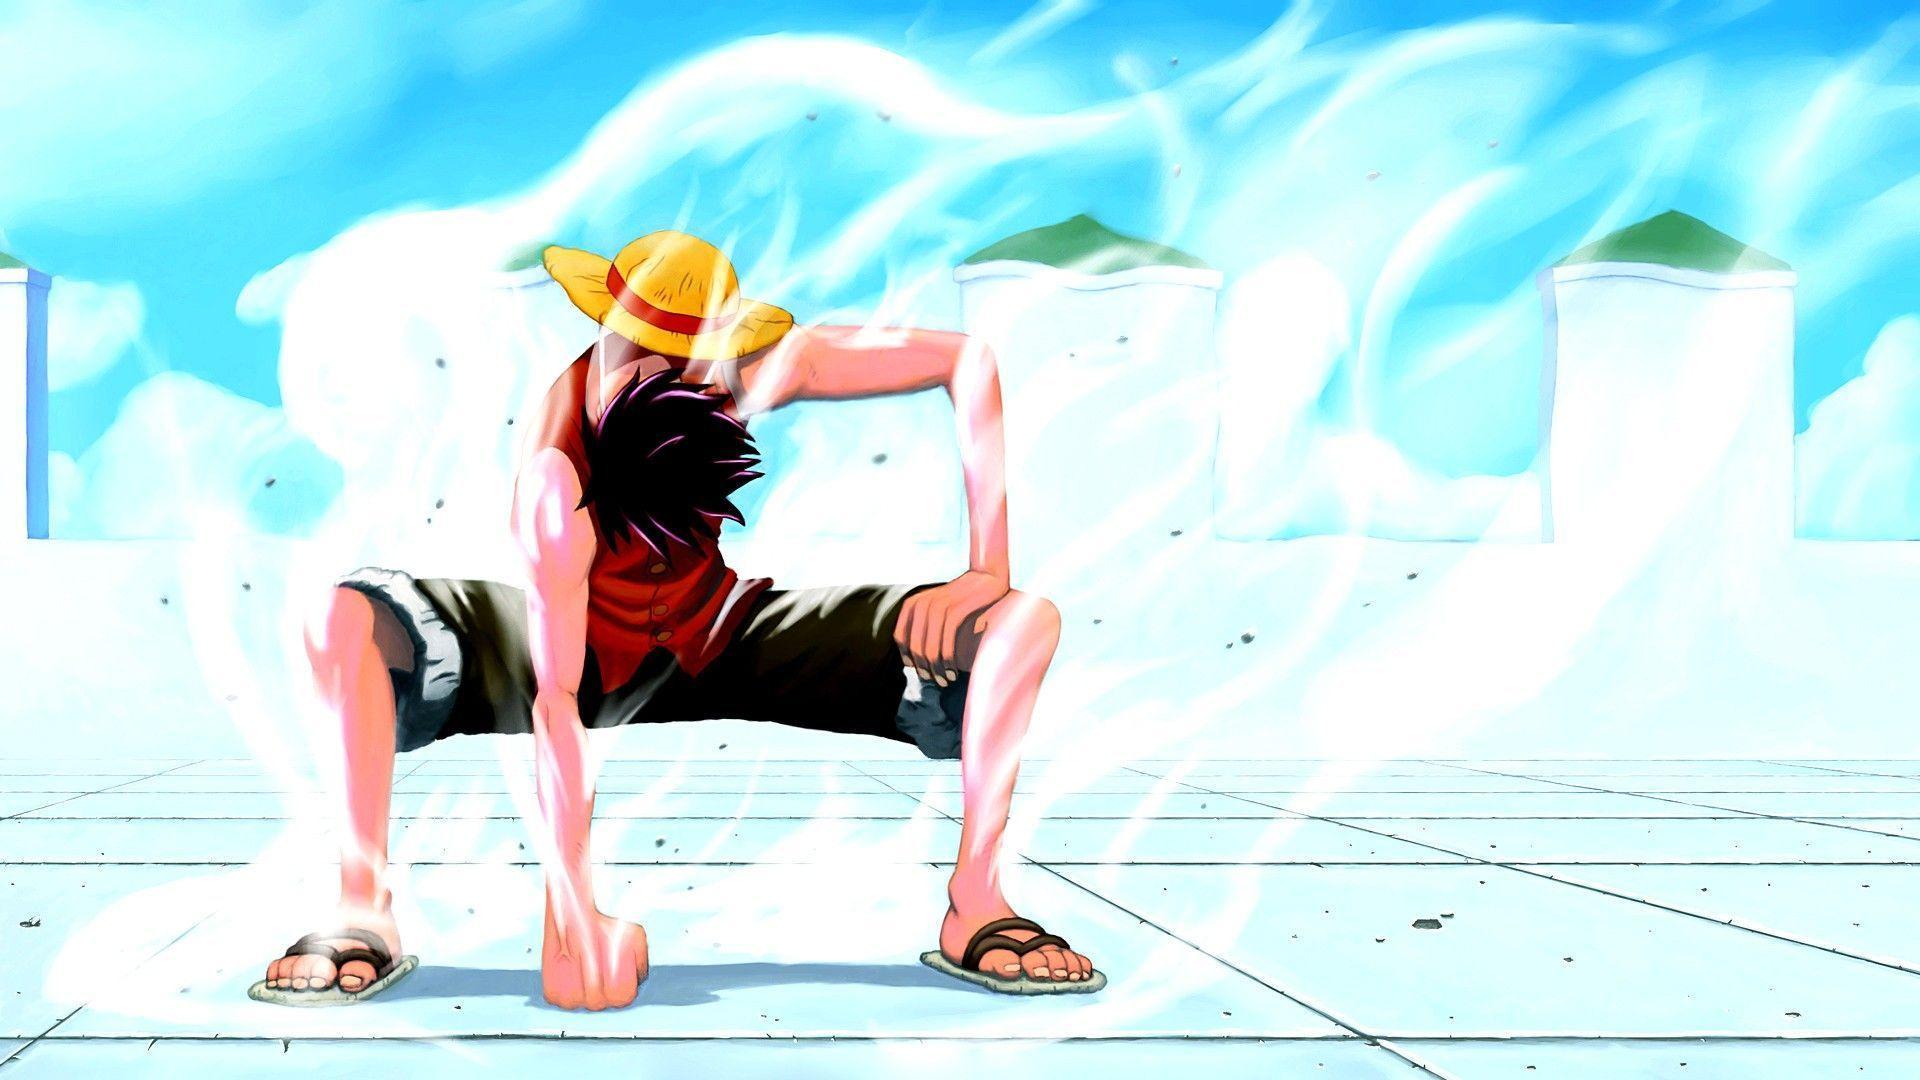 One Piece Wallpapers Luffy - Wallpaper Cave